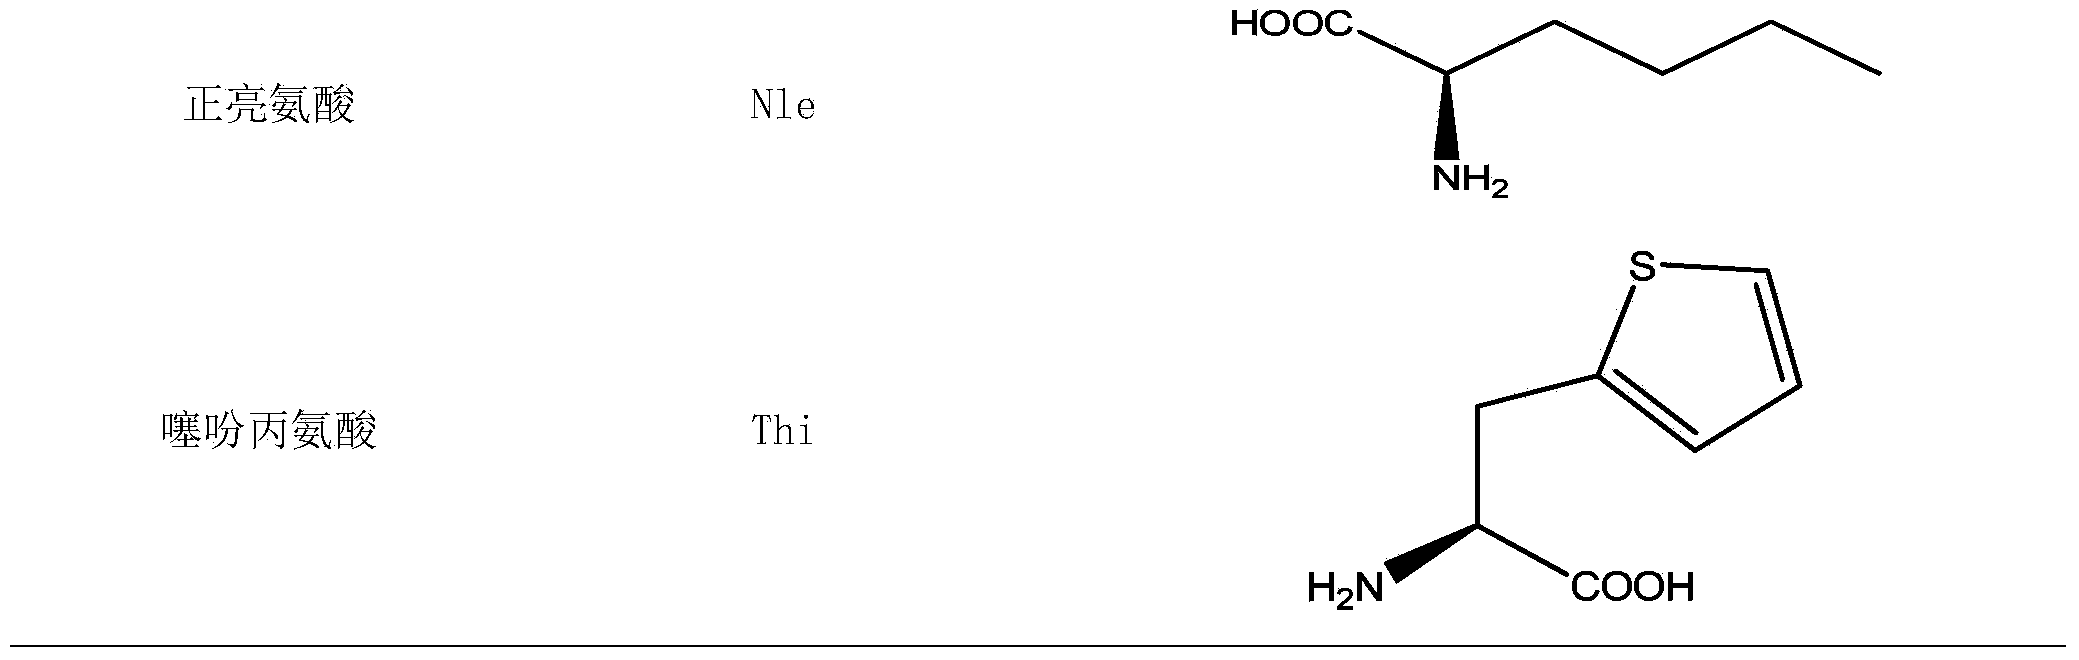 HRP5 analogue and preparation method thereof